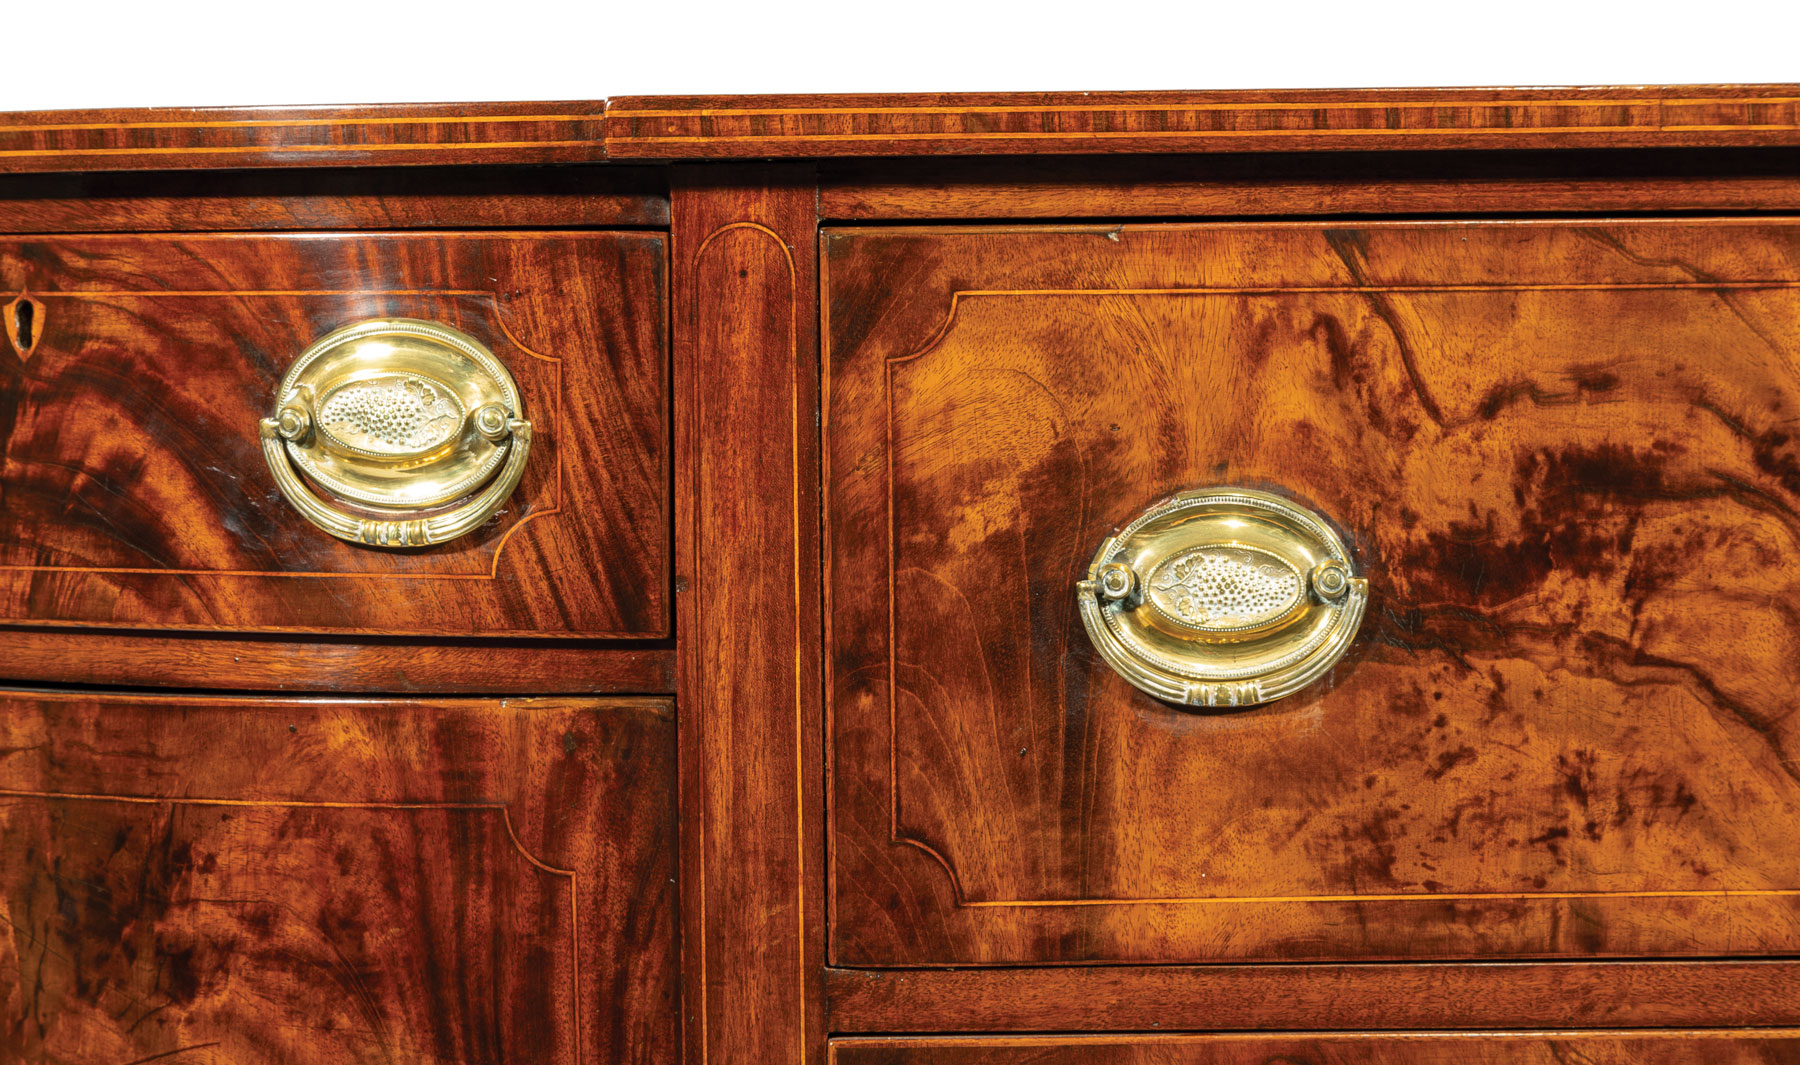 American Federal Inlaid Mahogany Sideboard, late 18th/early 19th c., shaped top, conforming case - Image 3 of 3